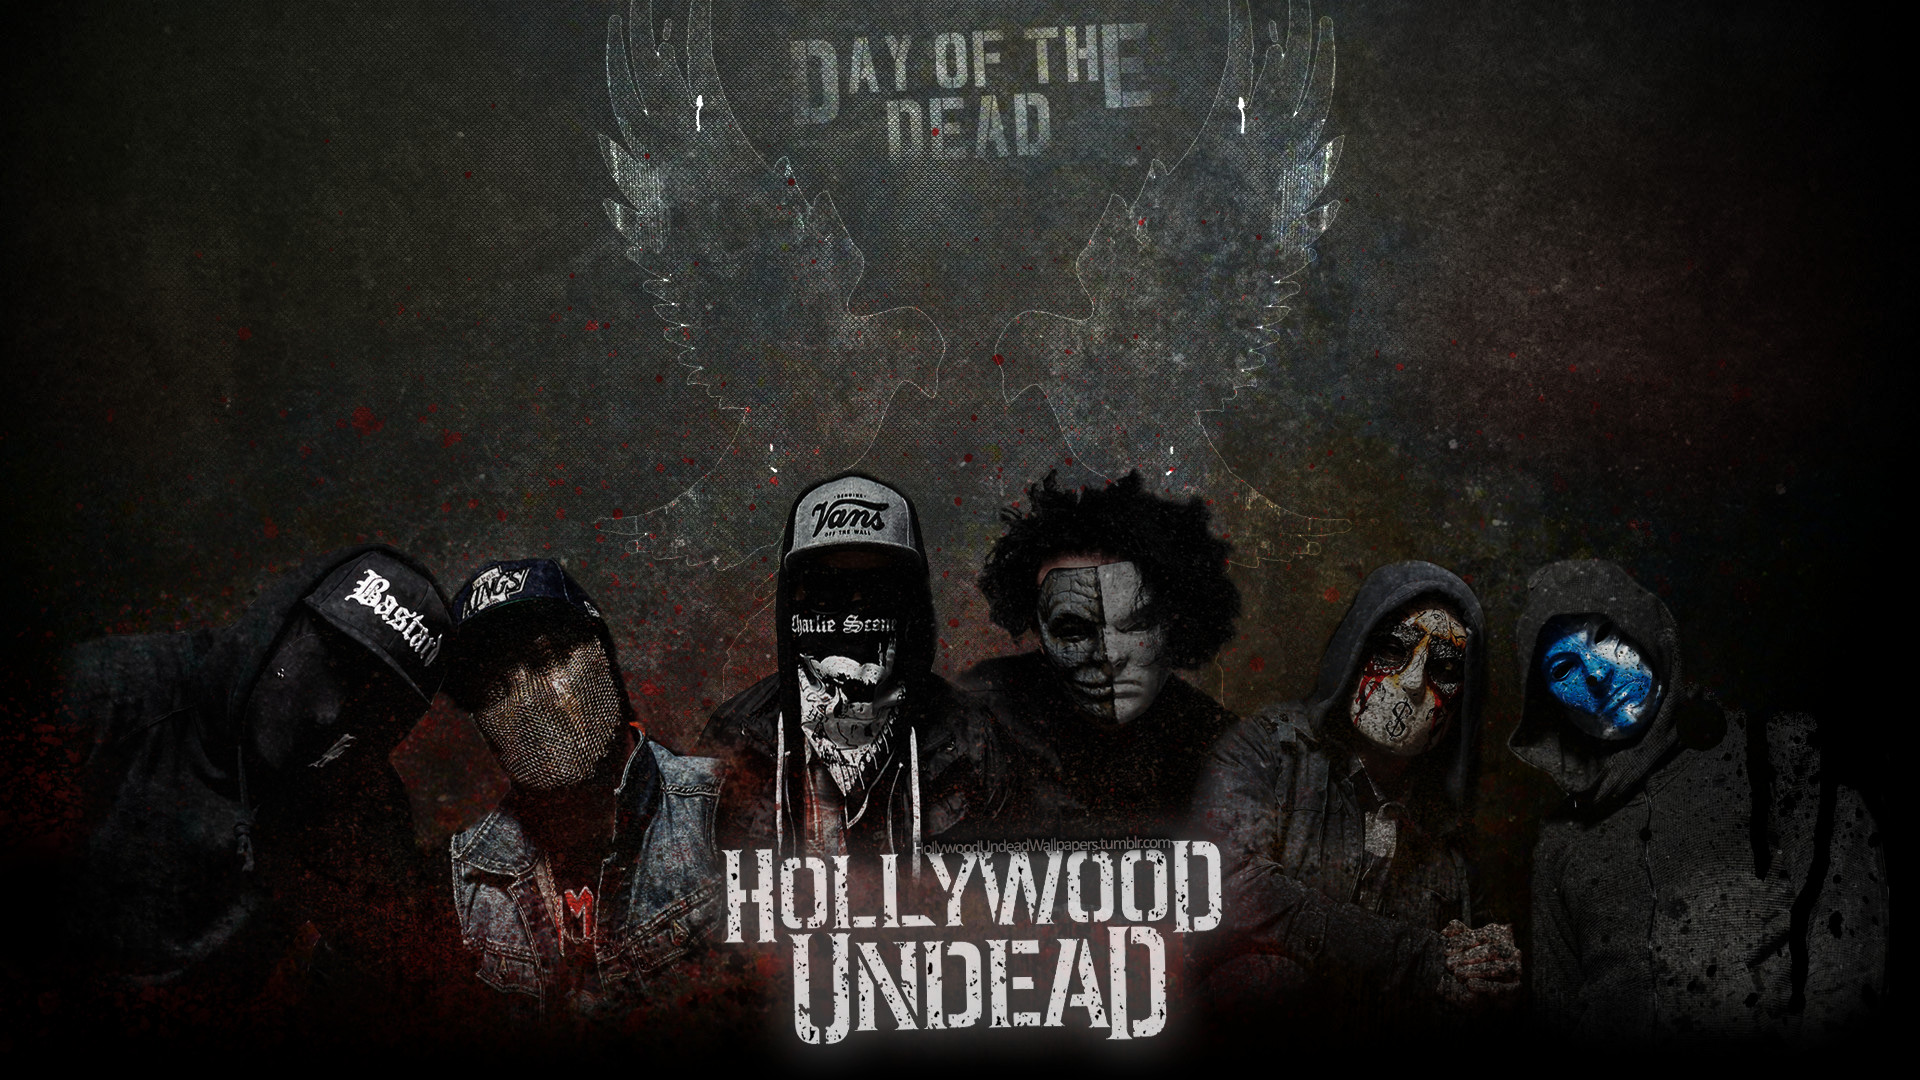 1920x1080 Hollywood Undead Day of the Dead WP NEW MASKS by emirulug on 